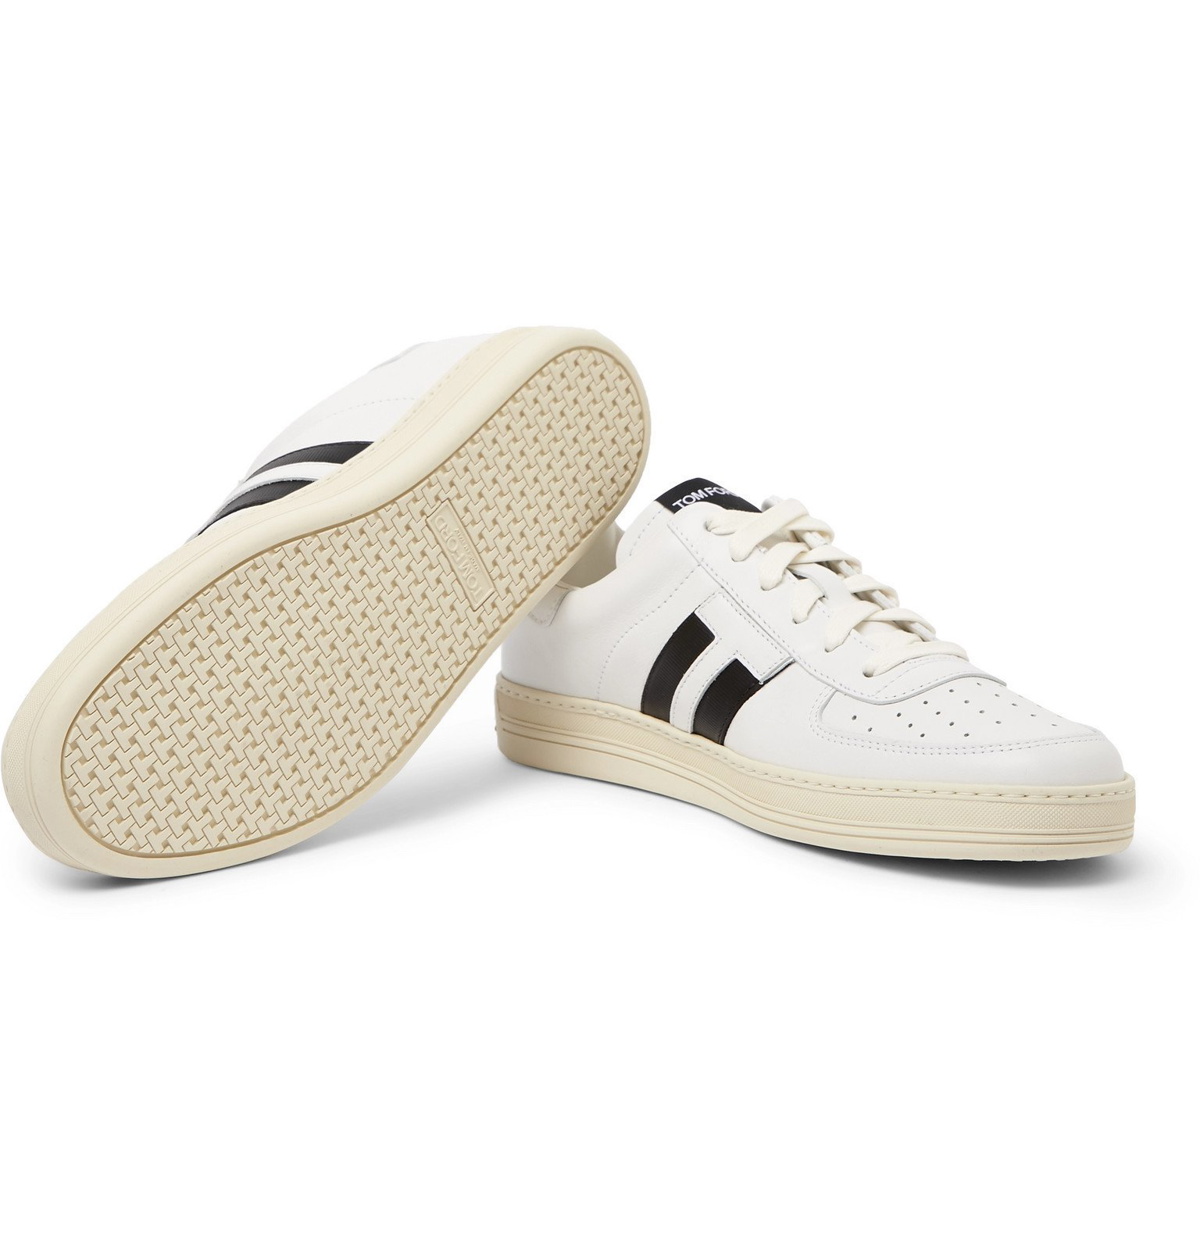 TOM FORD - Radcliffe Leather Sneakers - White TOM FORD